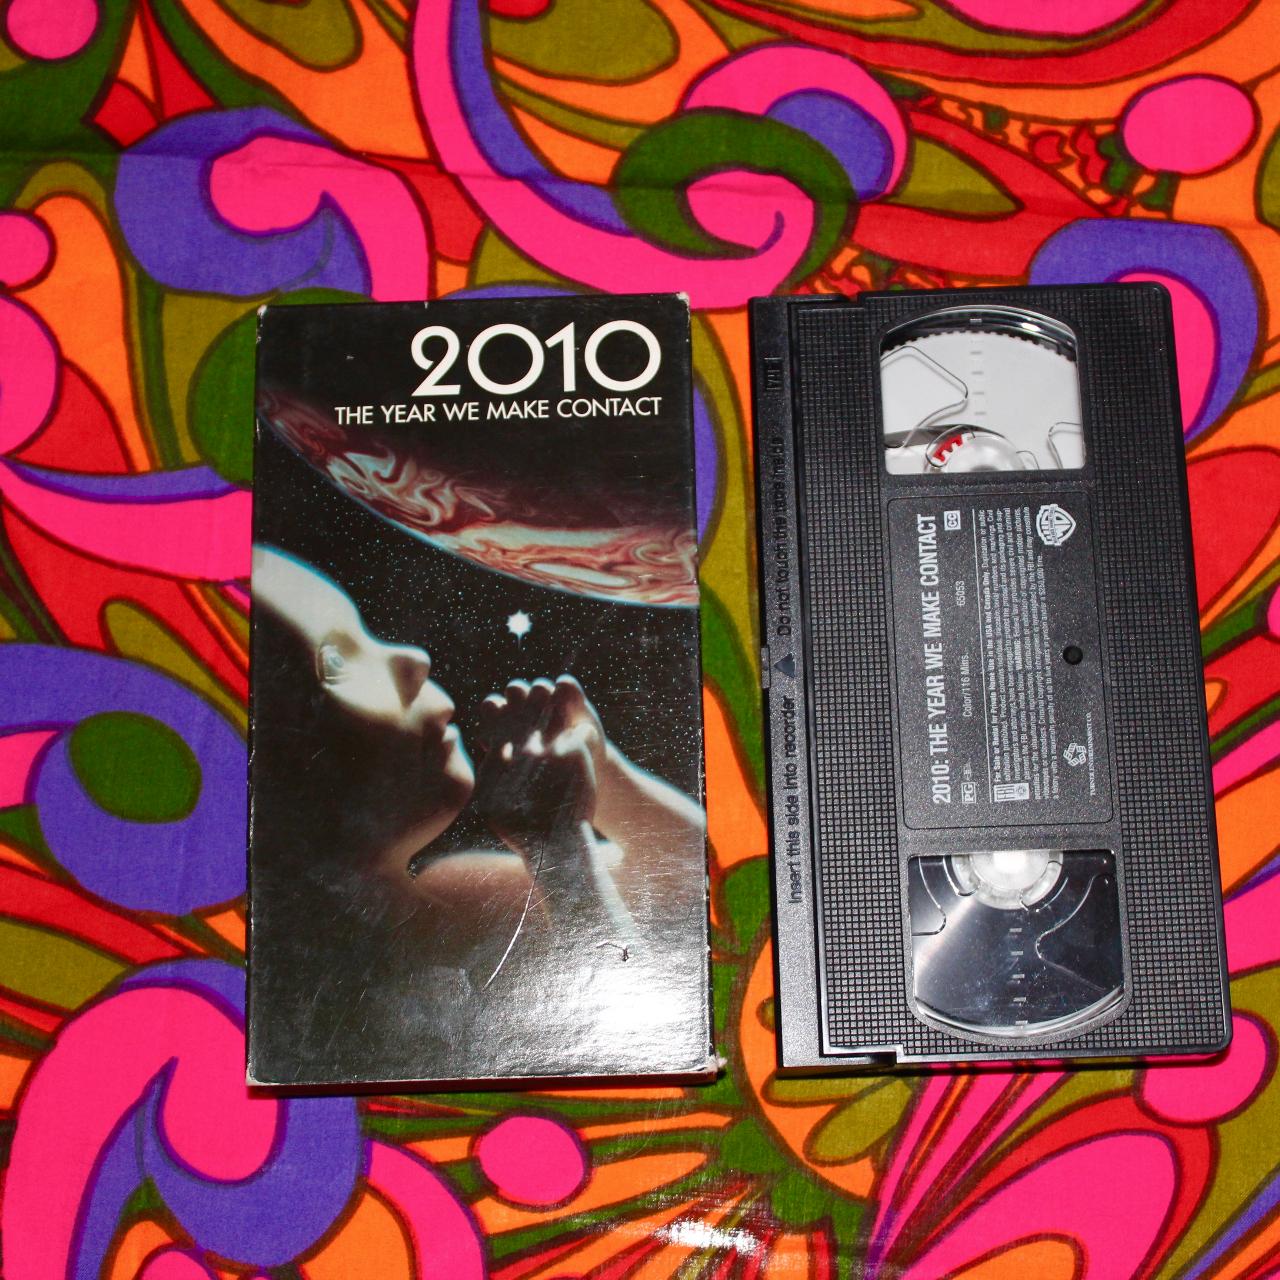 THE　VHS　CONTACT,　(1984)-　MAKE　$3...　YEAR　2010:　$12　WE　Depop